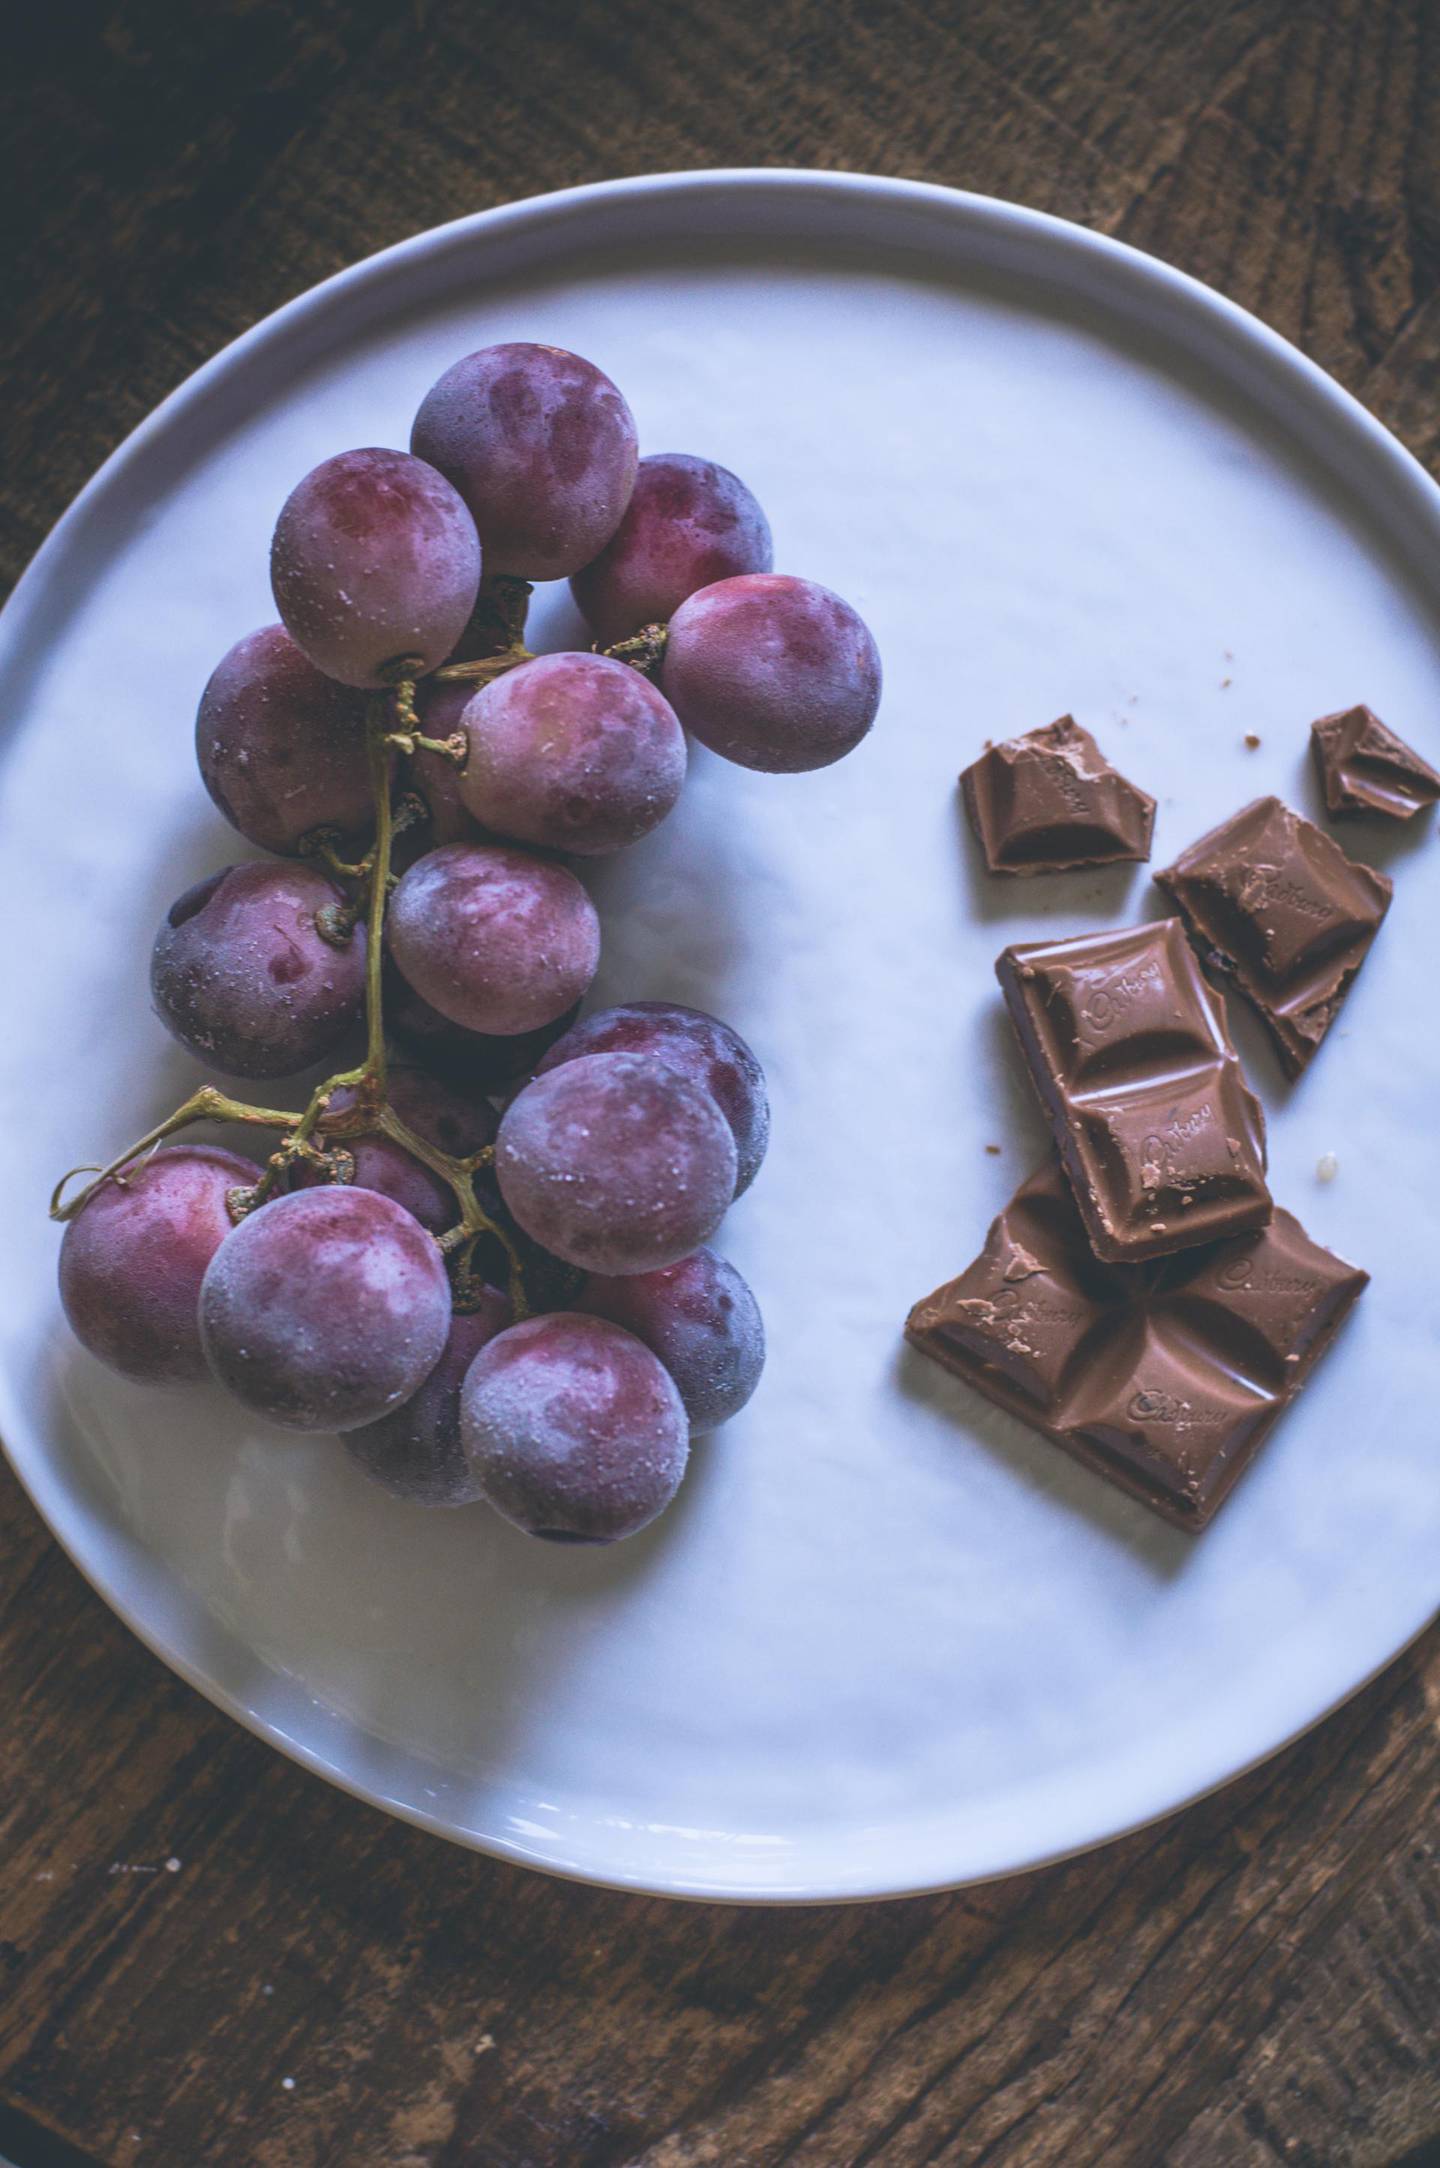 Frozen grapes and chocolate make for a tasty snack. Courtesy Scott Price